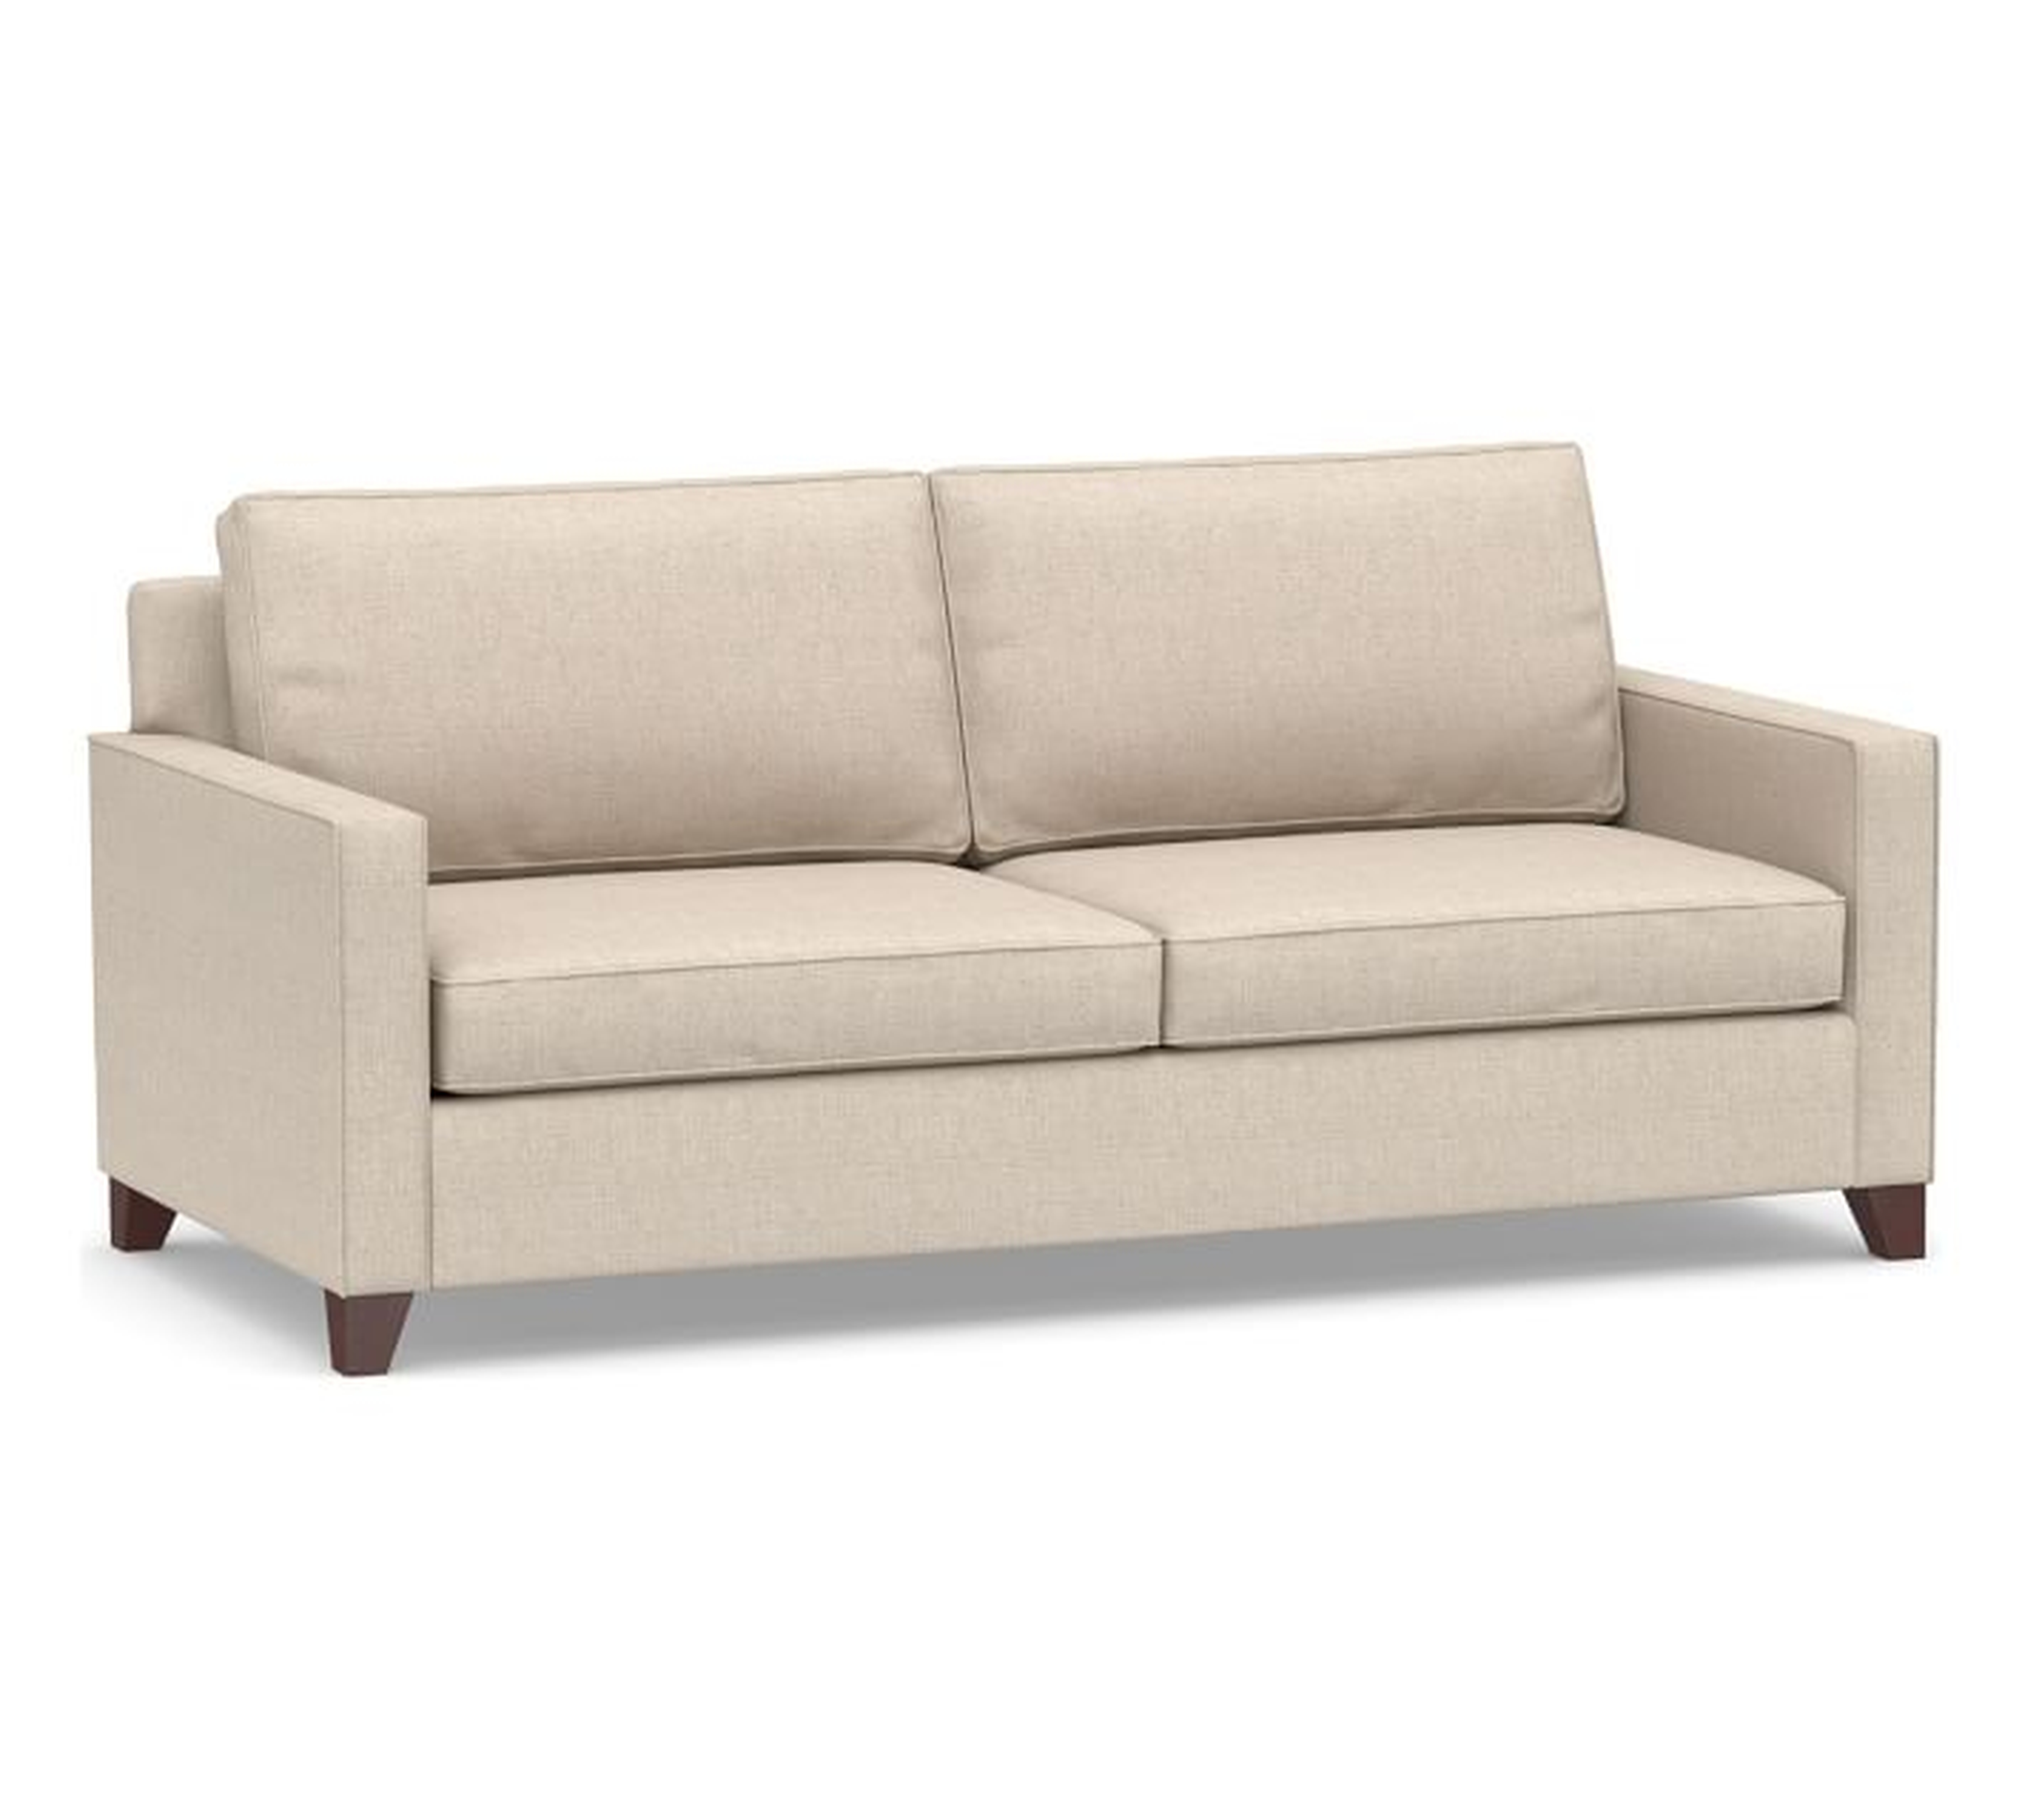 Cameron Square Arm Upholstered Deep Seat Grand Sofa 2-Seater 95", Polyester Wrapped Cushions, Performance Everydaylinen(TM) Oatmeal - Pottery Barn